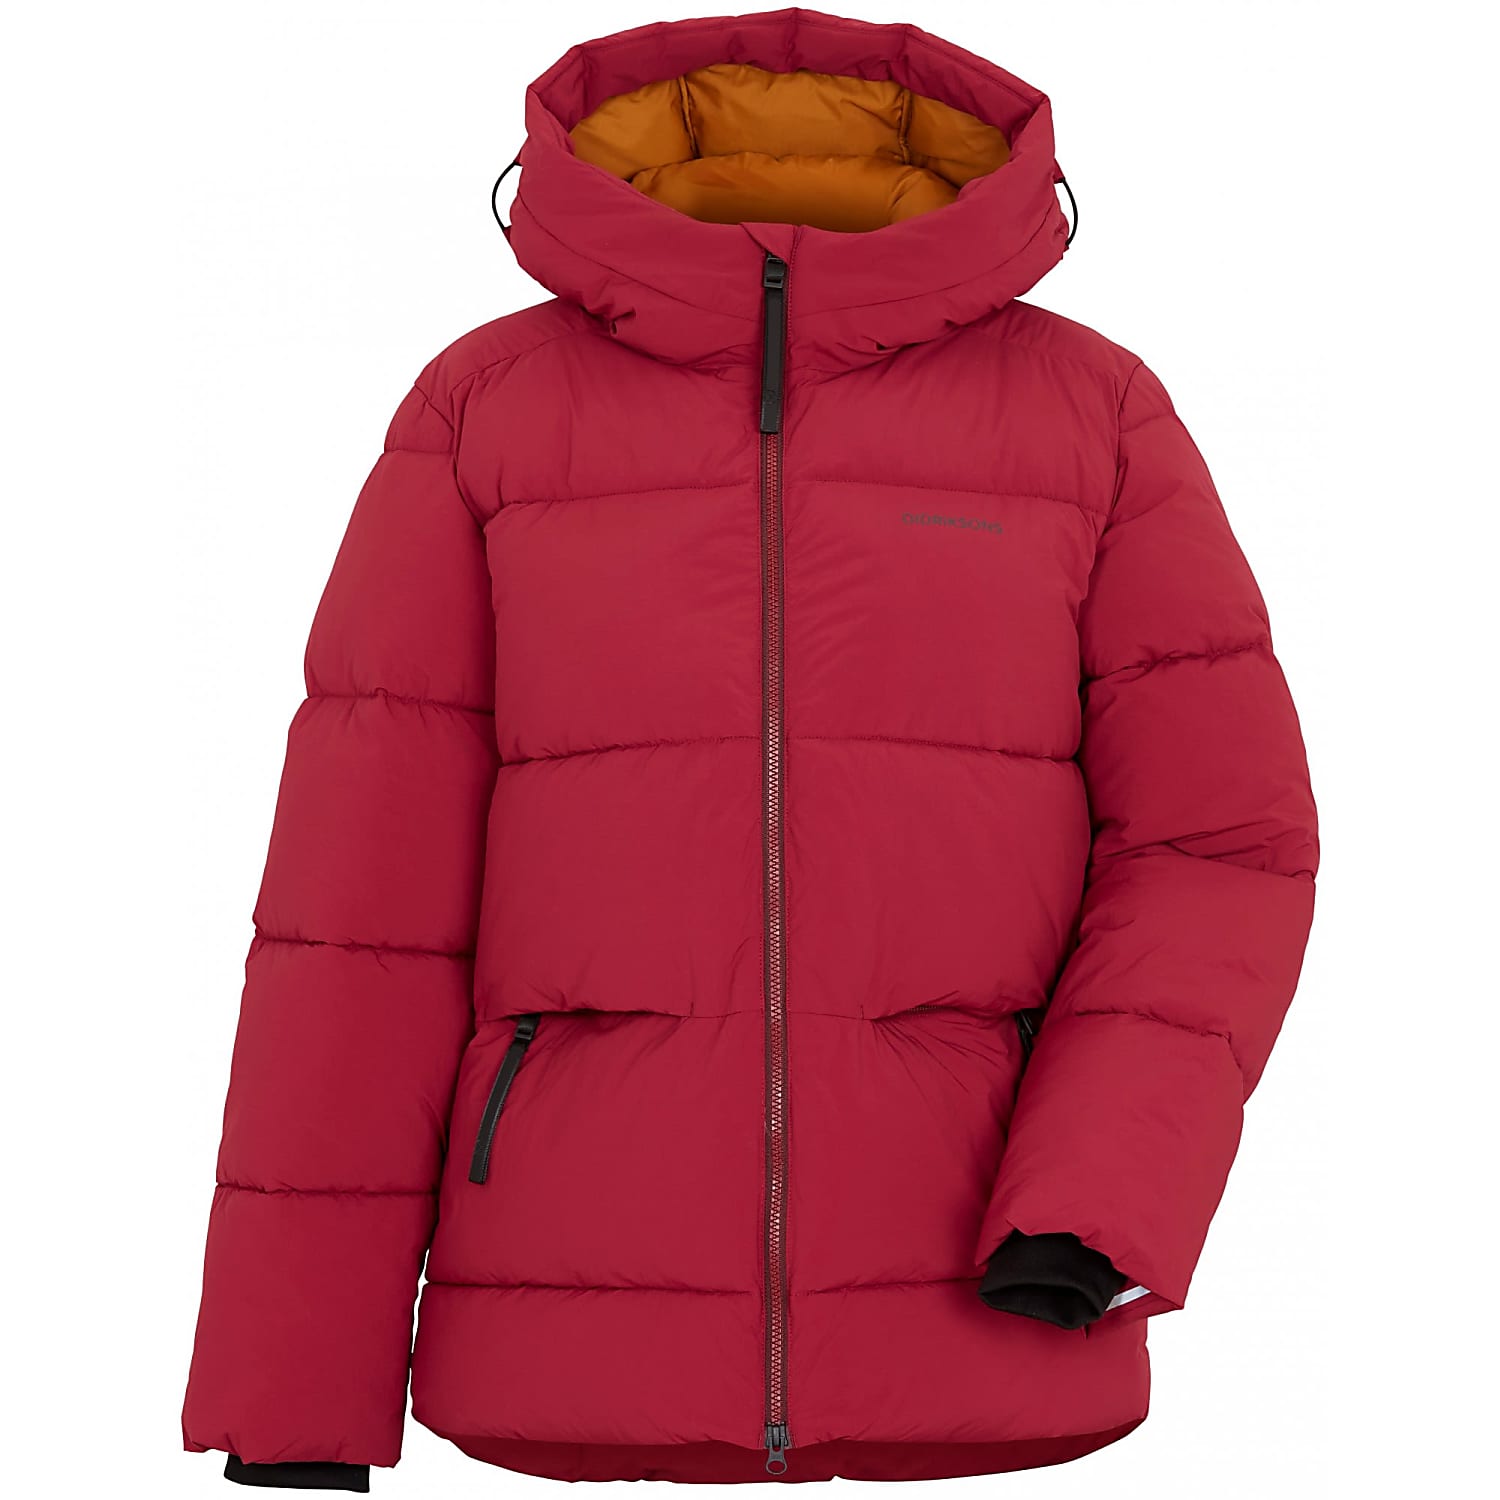 Red - Ruby cheap JACKET Fast W shipping NOMI Didriksons 2, and